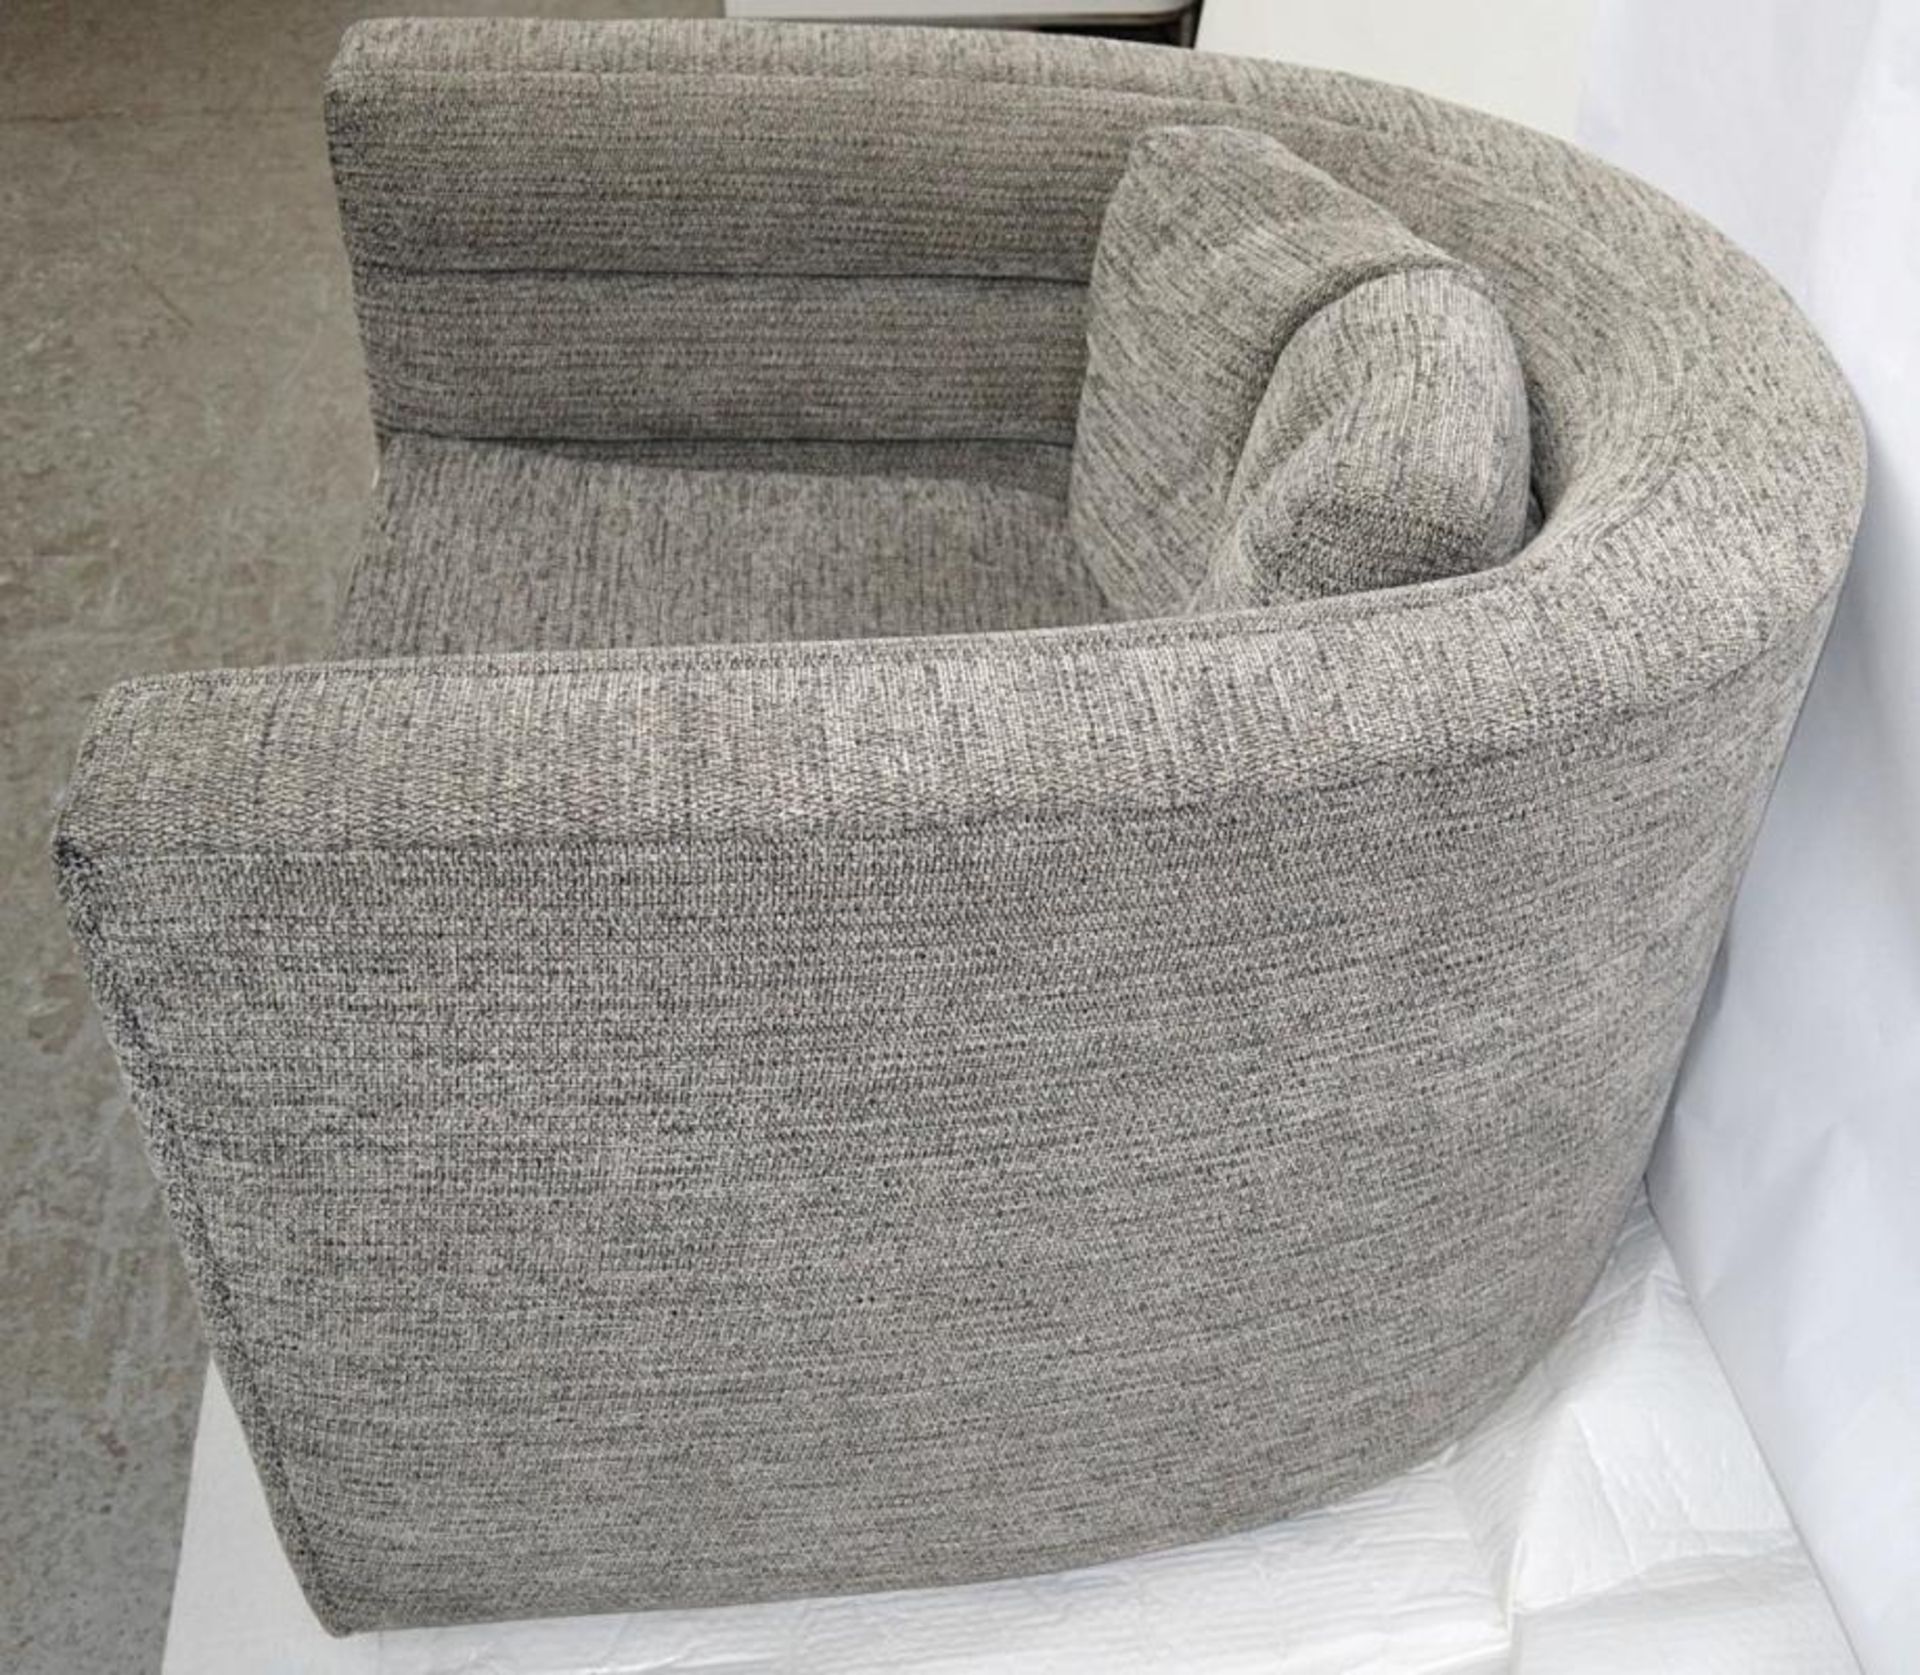 1 x KELLY WEARSTLER Melrose Club Chair In Grey - Dimensions: W36" x D38" x H28" - Ref: 5223289 - CL0 - Image 8 of 24